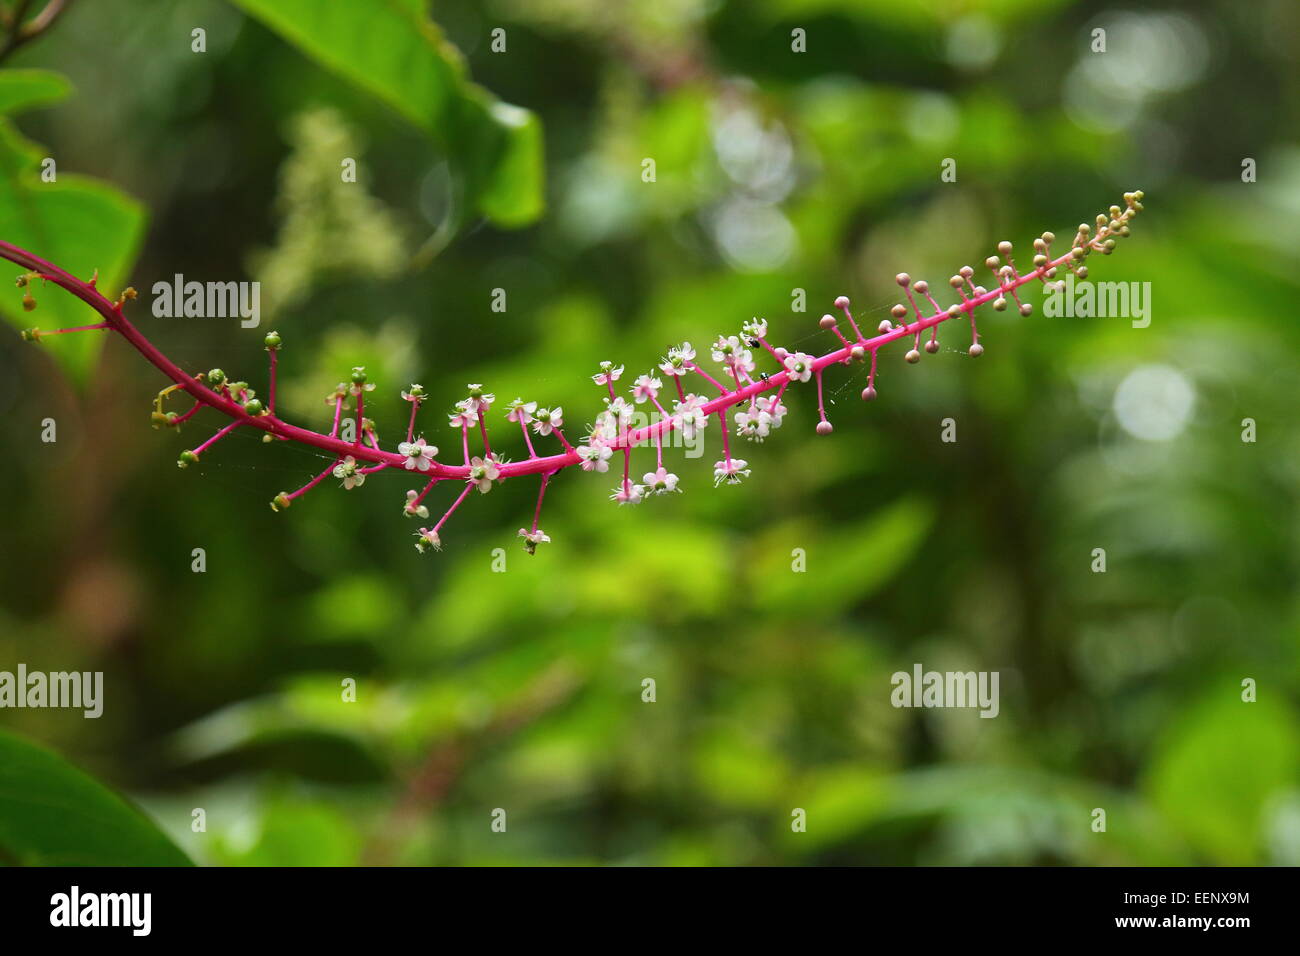 Closeup of delicate white flowers growing on a pink branch in the cloud forest of Monteverde Biological Reserve, Costa Rica. Stock Photo